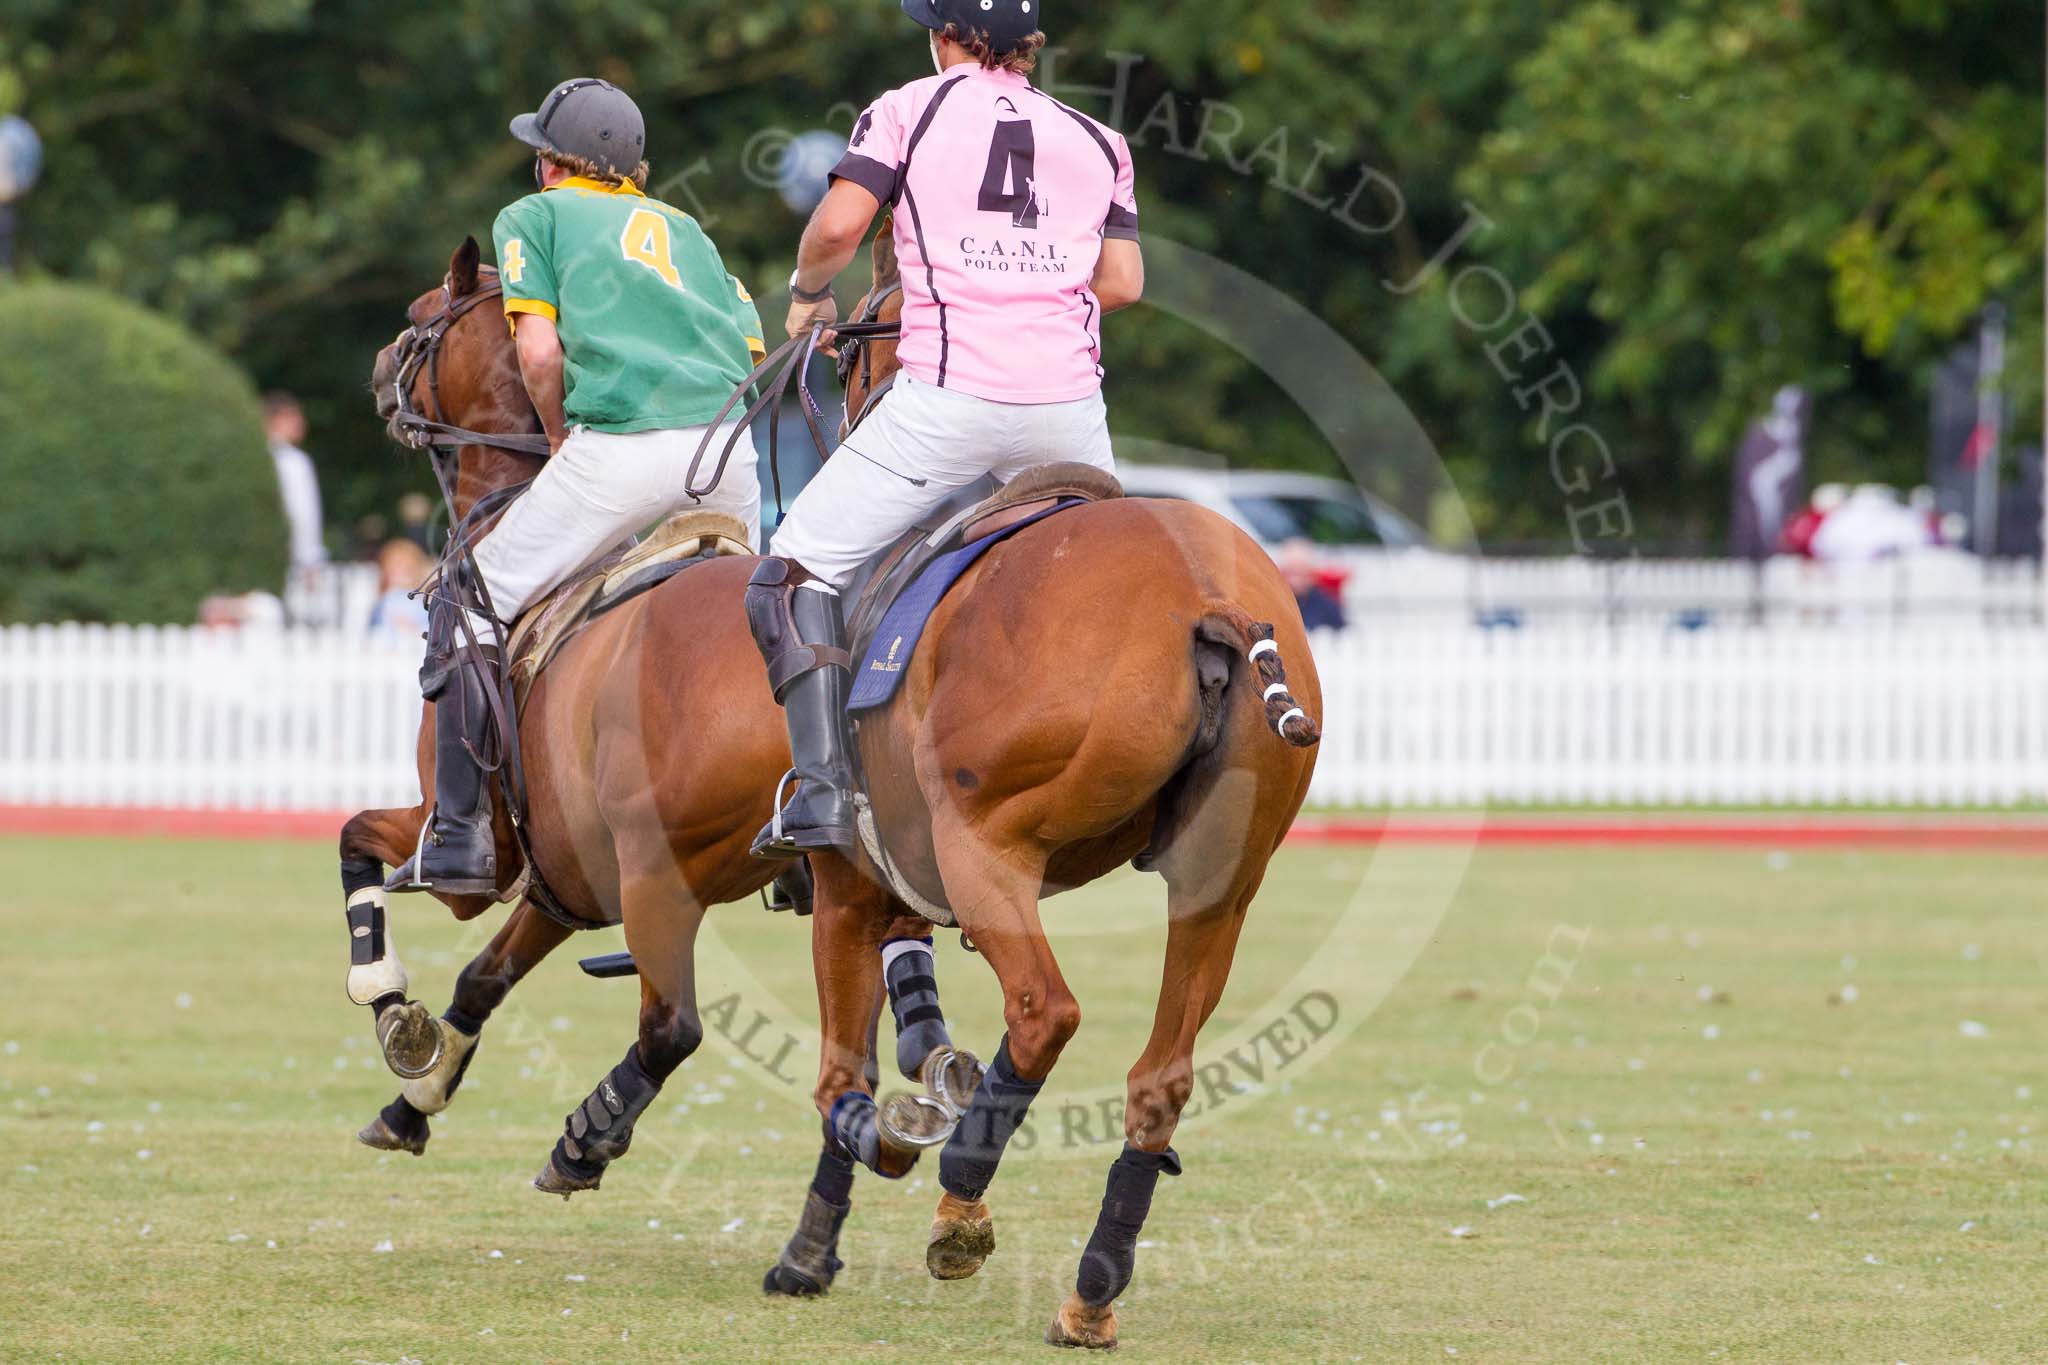 DBPC Polo in the Park 2013, Final of the Tusk Trophy (4 Goals), Rutland vs C.A.N.I..
Dallas Burston Polo Club, ,
Southam,
Warwickshire,
United Kingdom,
on 01 September 2013 at 17:07, image #635